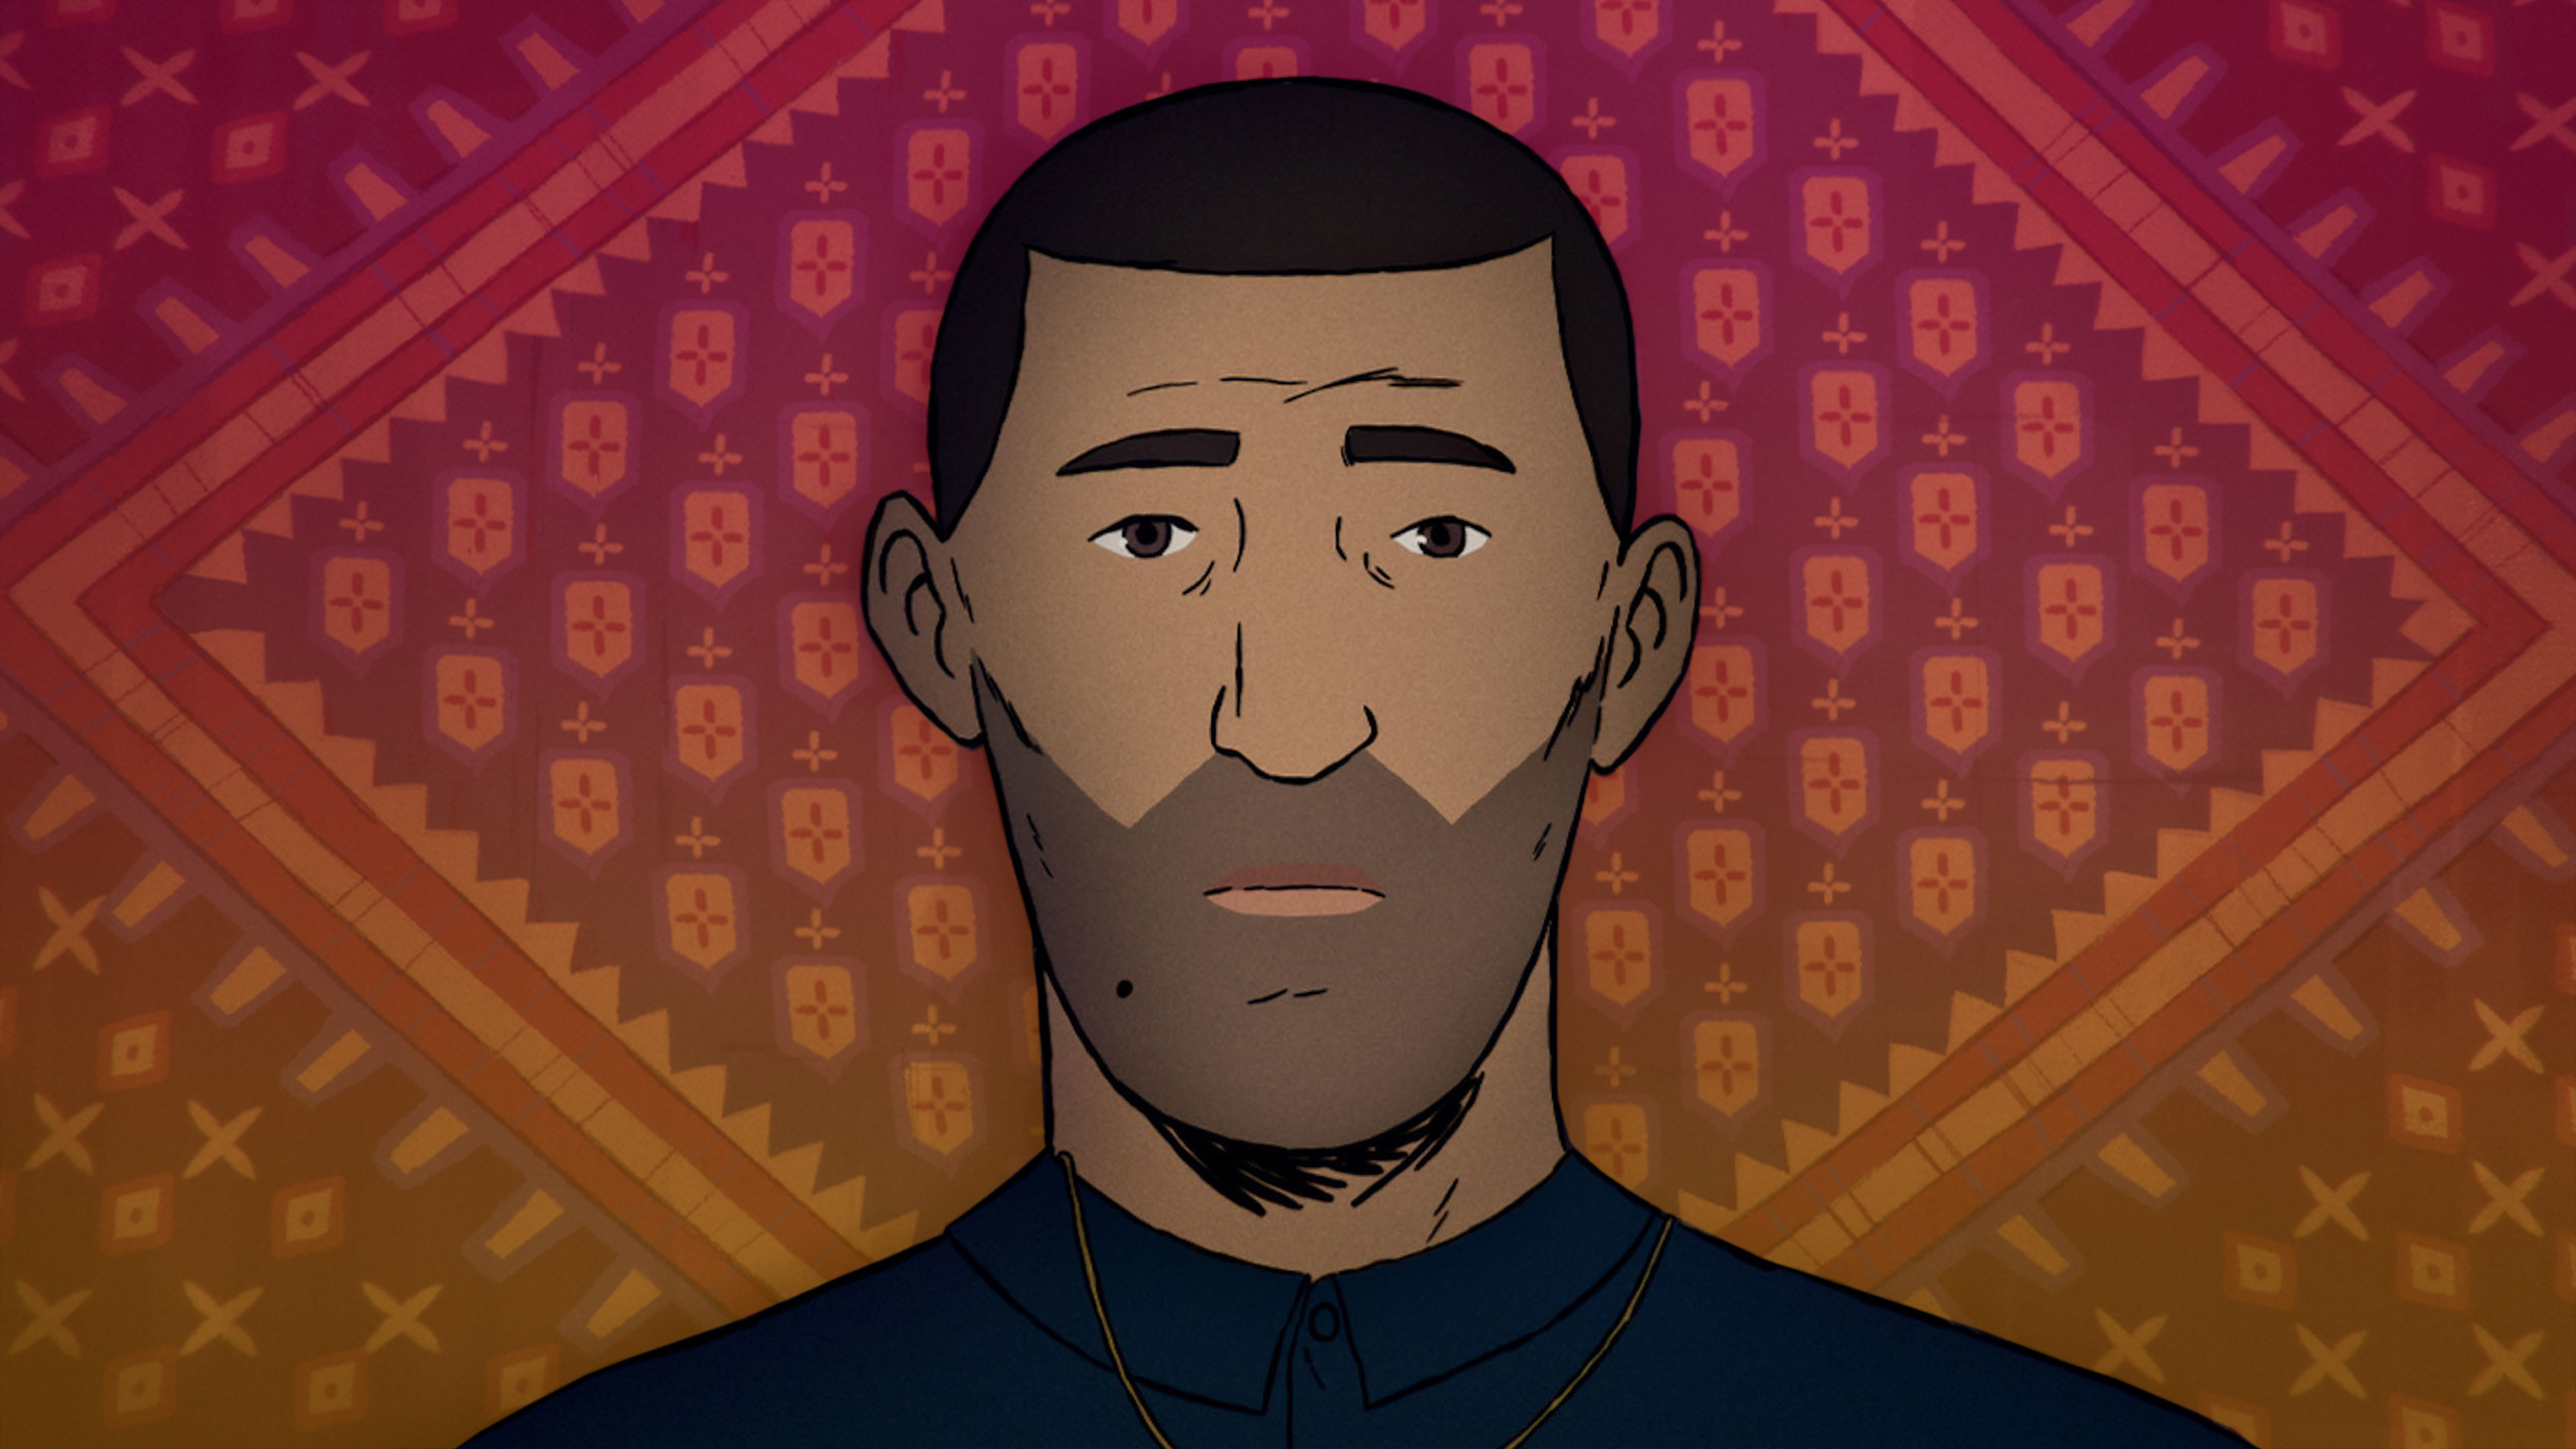 Cartoon drawing of a man against a patterned background, from the documentary Flee